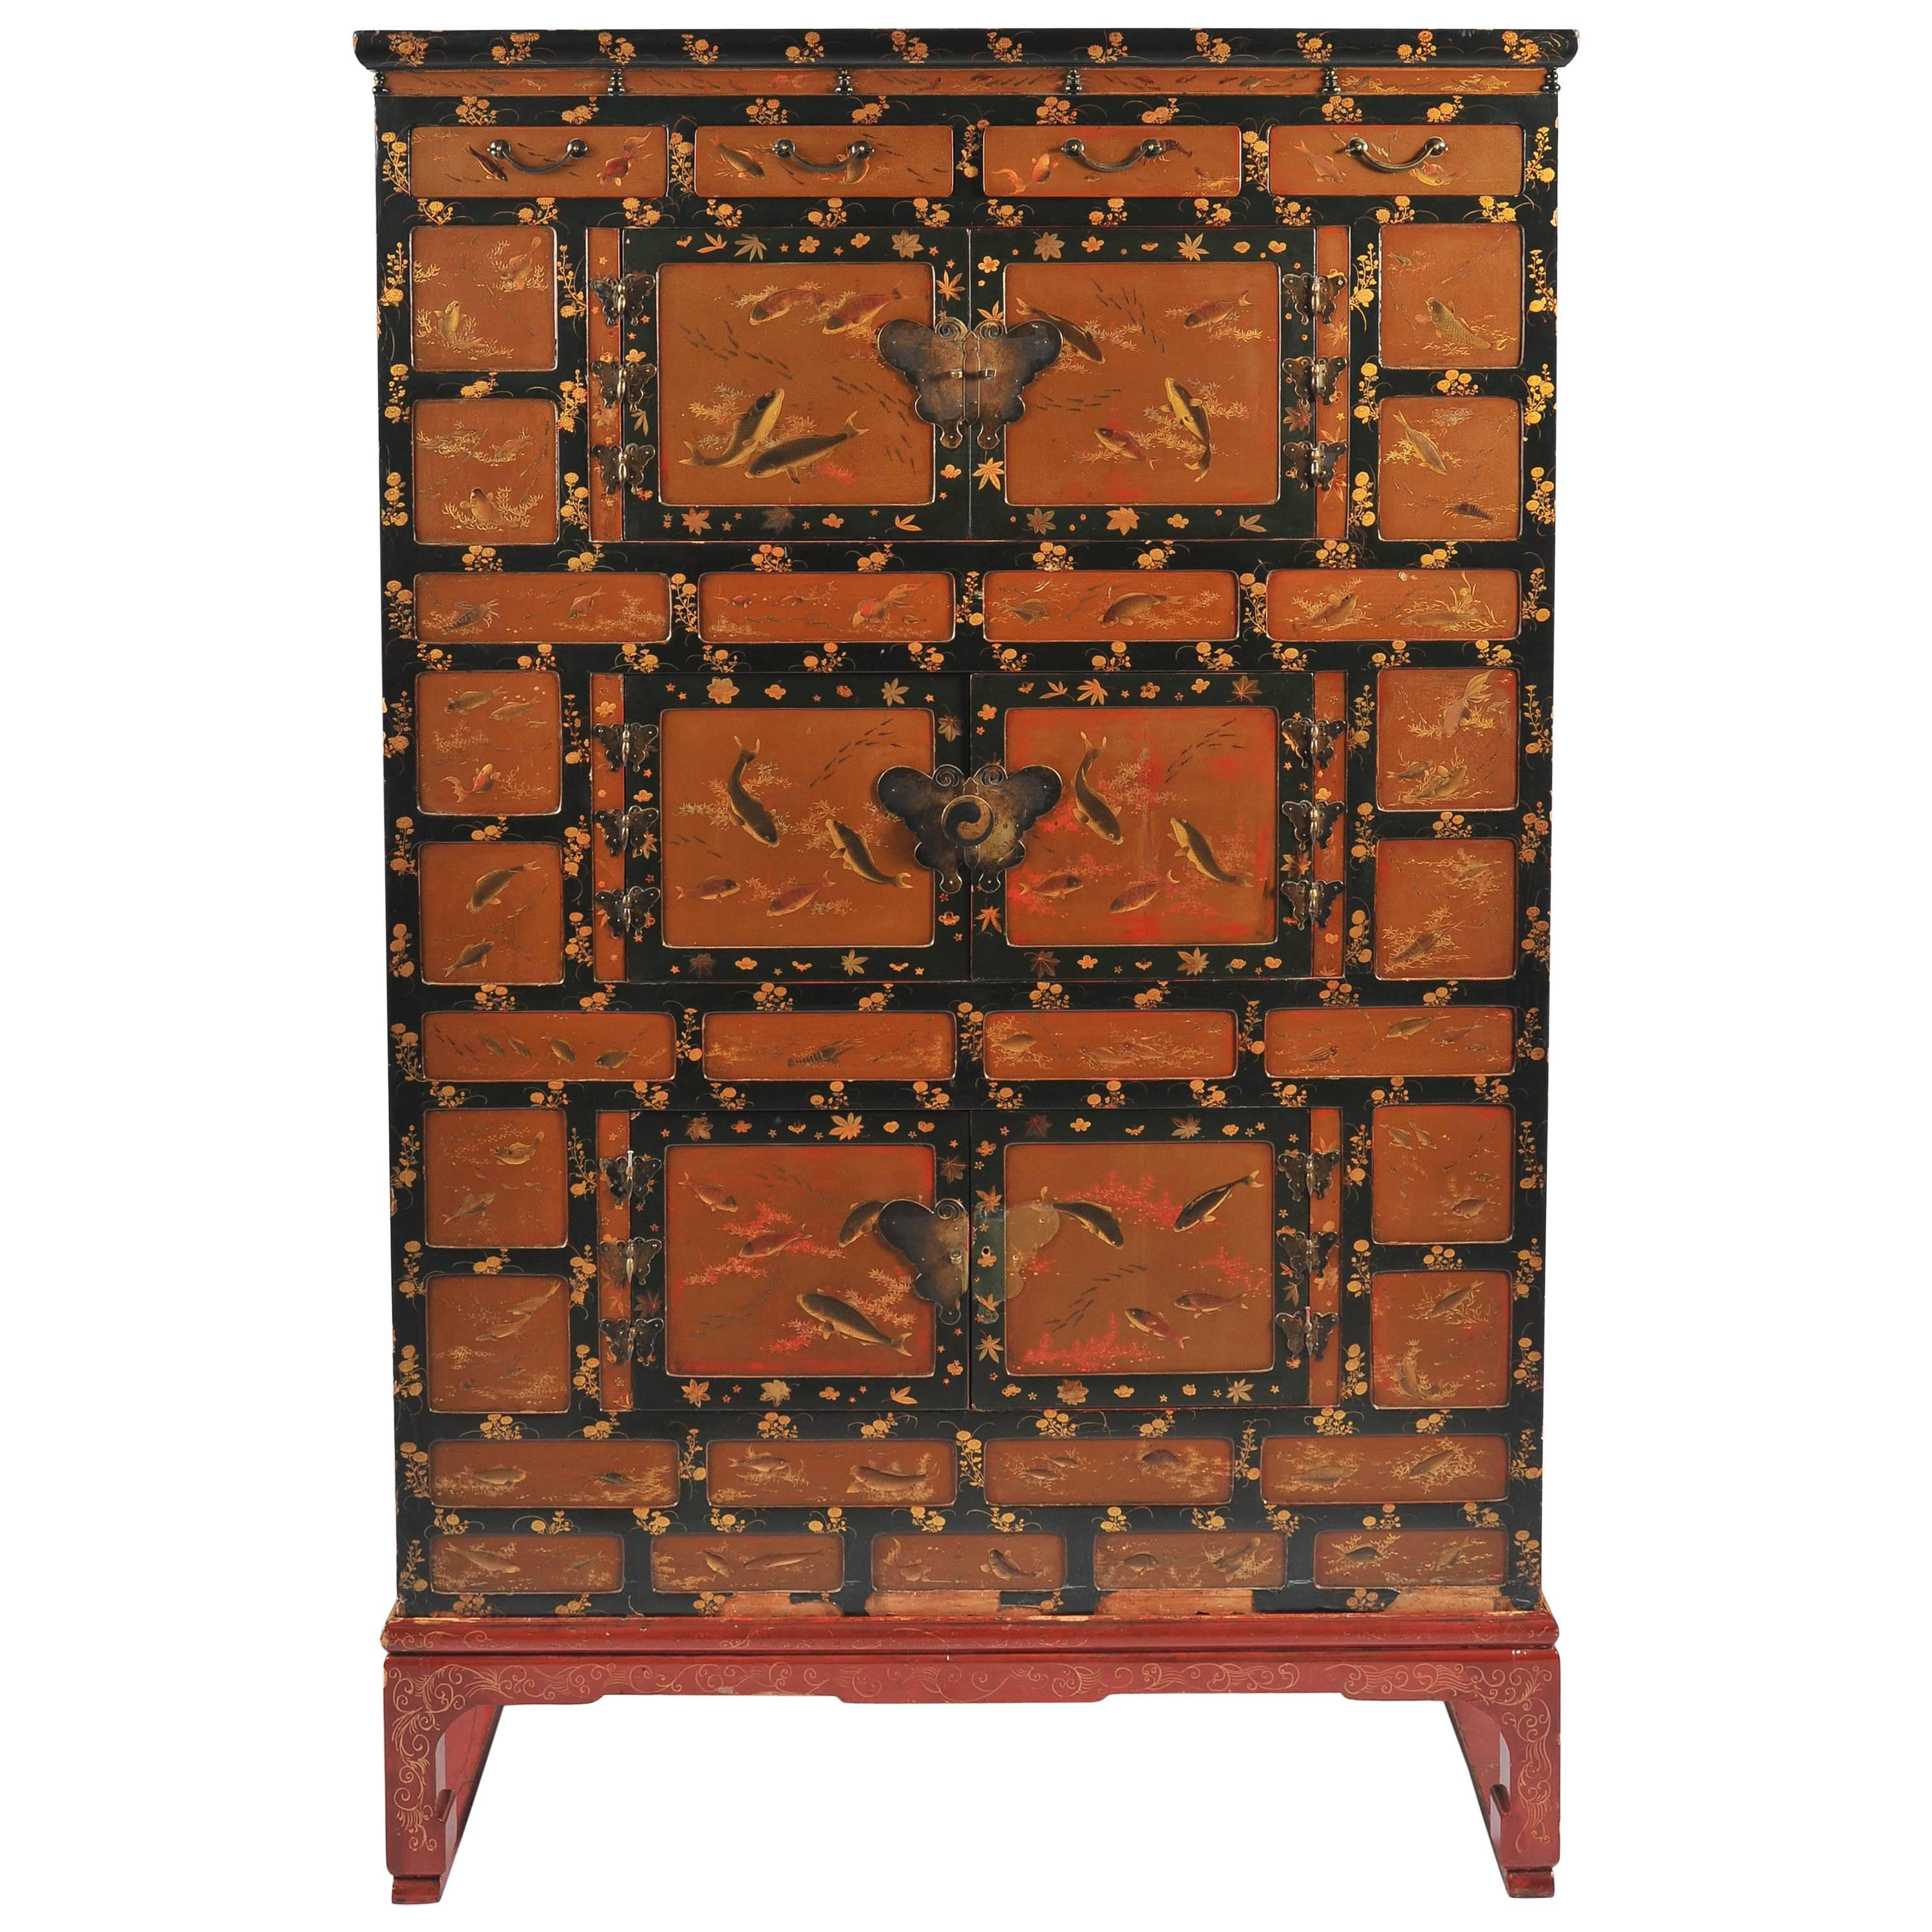 Japanese Meiji Period Lacquer Cabinet